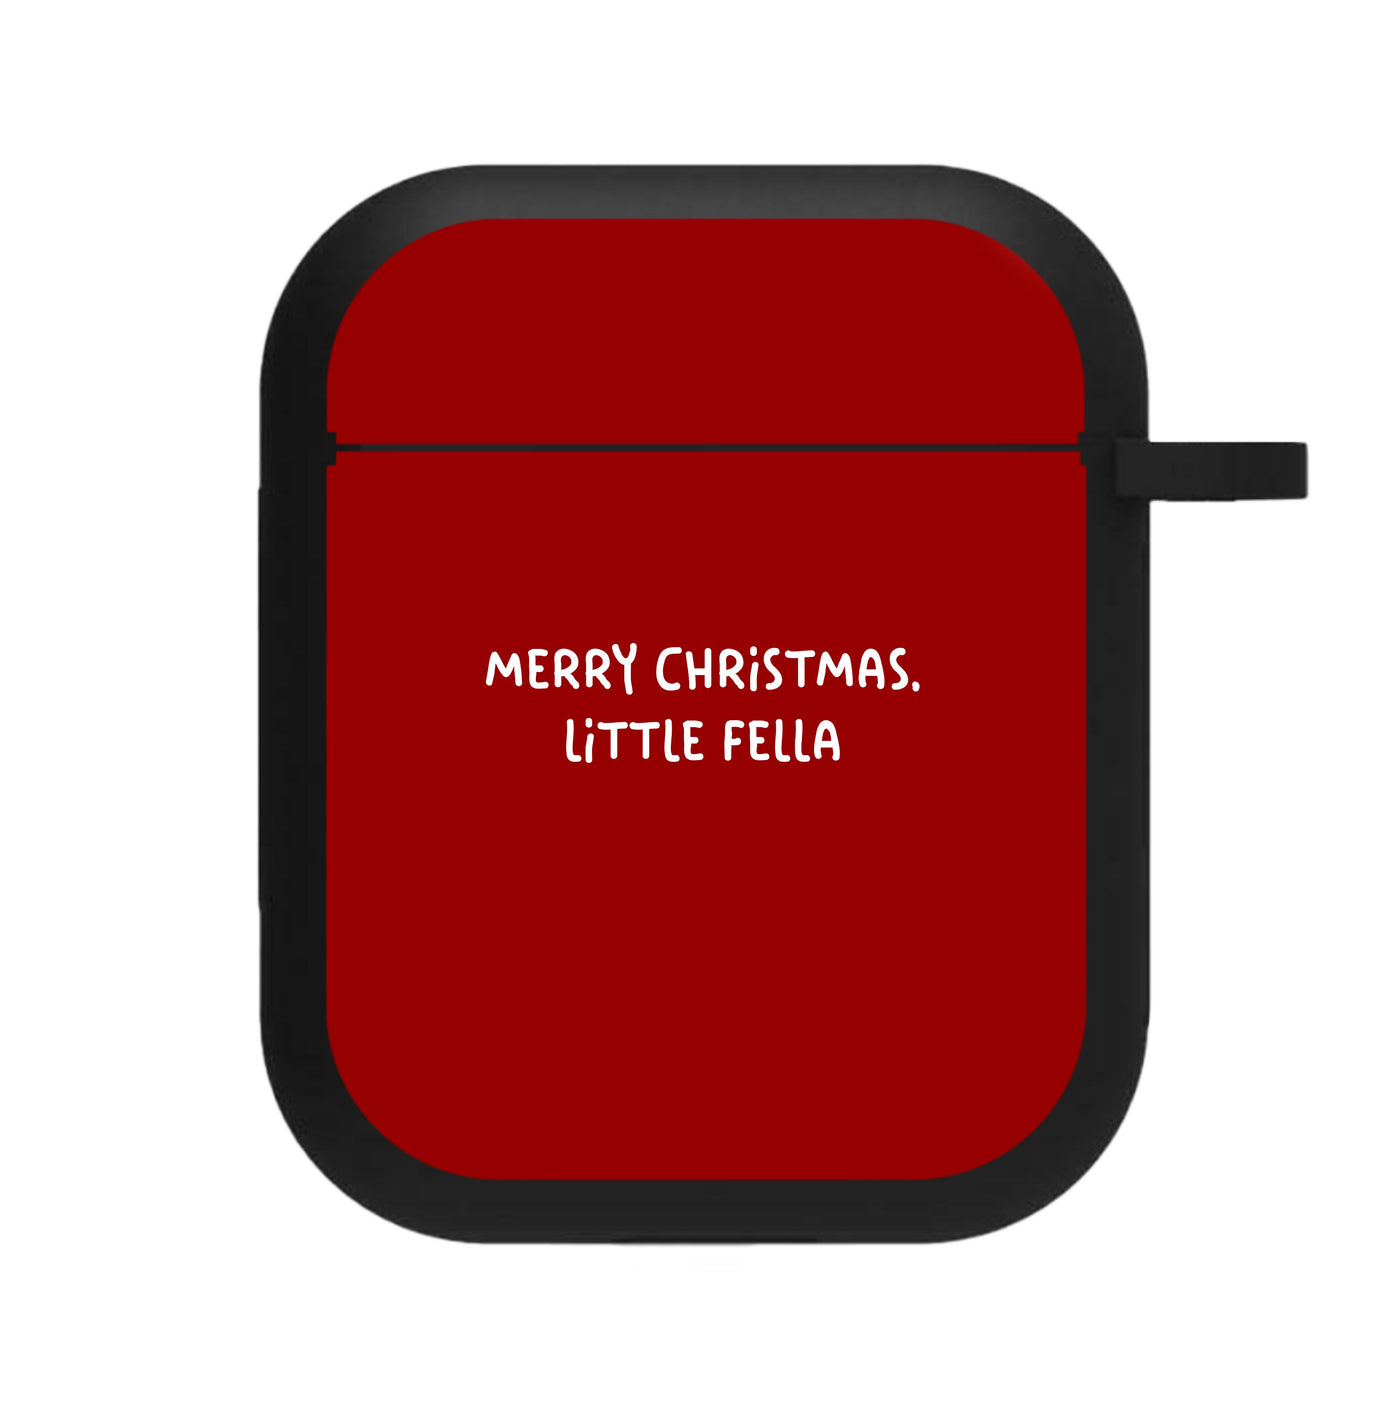 Merry Christmas Little Fella - Home Alone AirPods Case